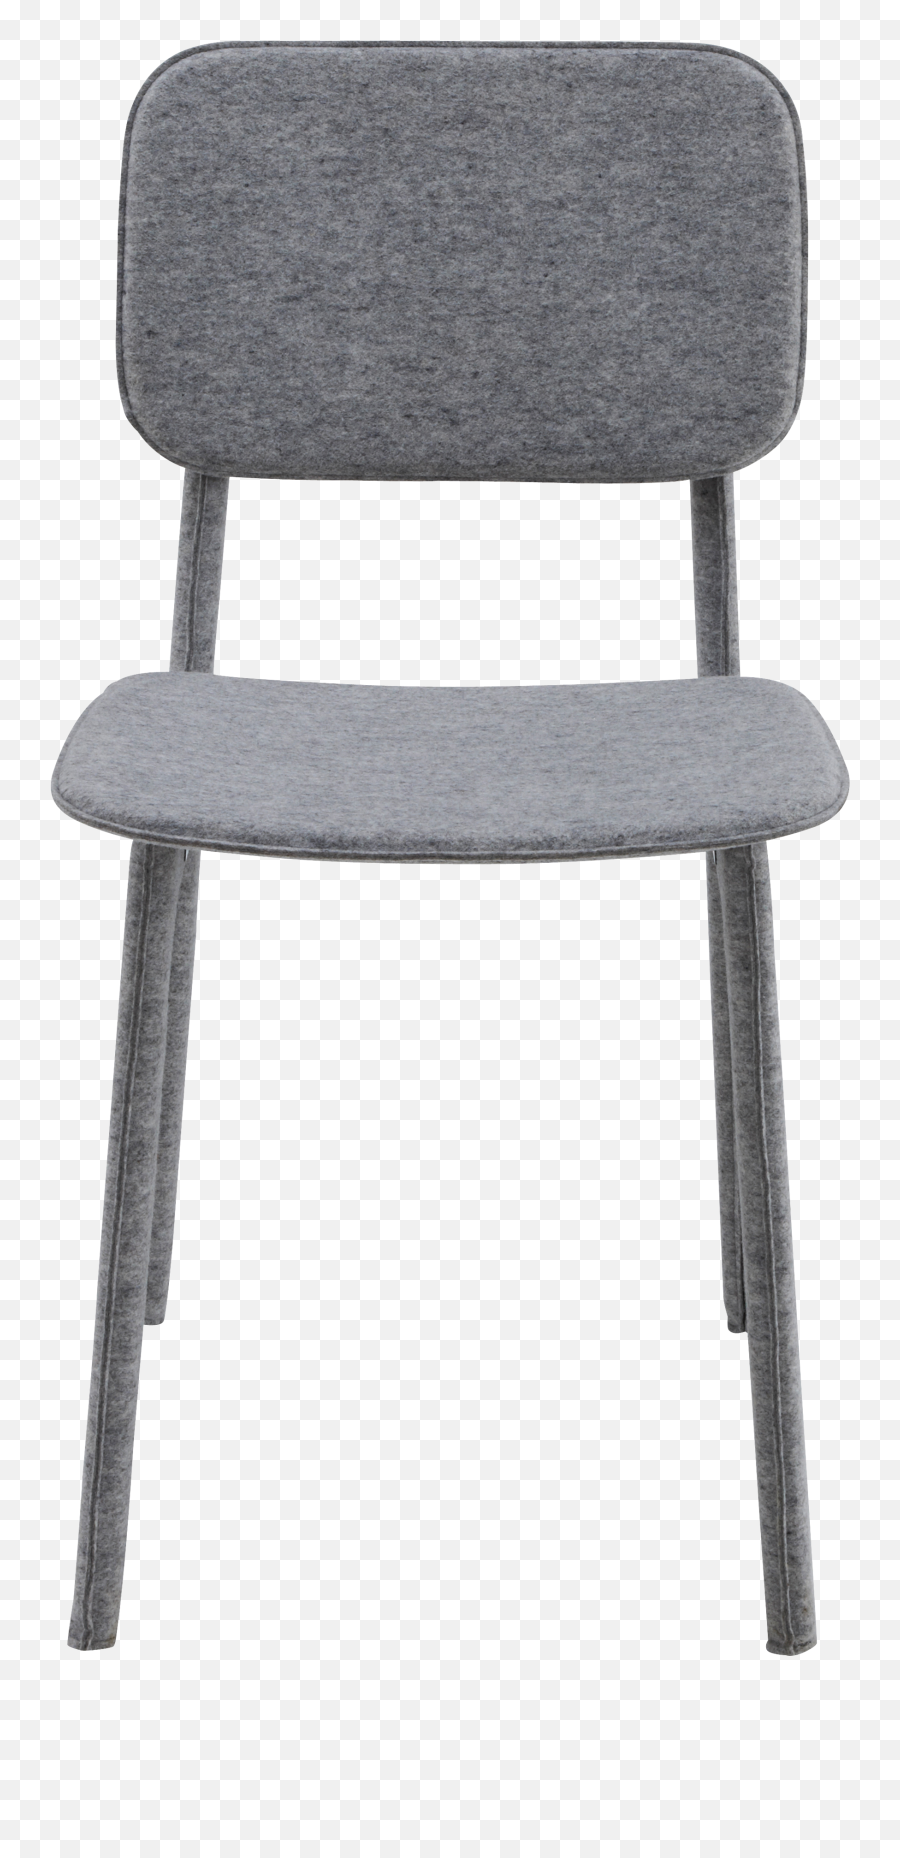 Chair Png Images Free Download - Transparent Background Classroom Chair,Chairs Png